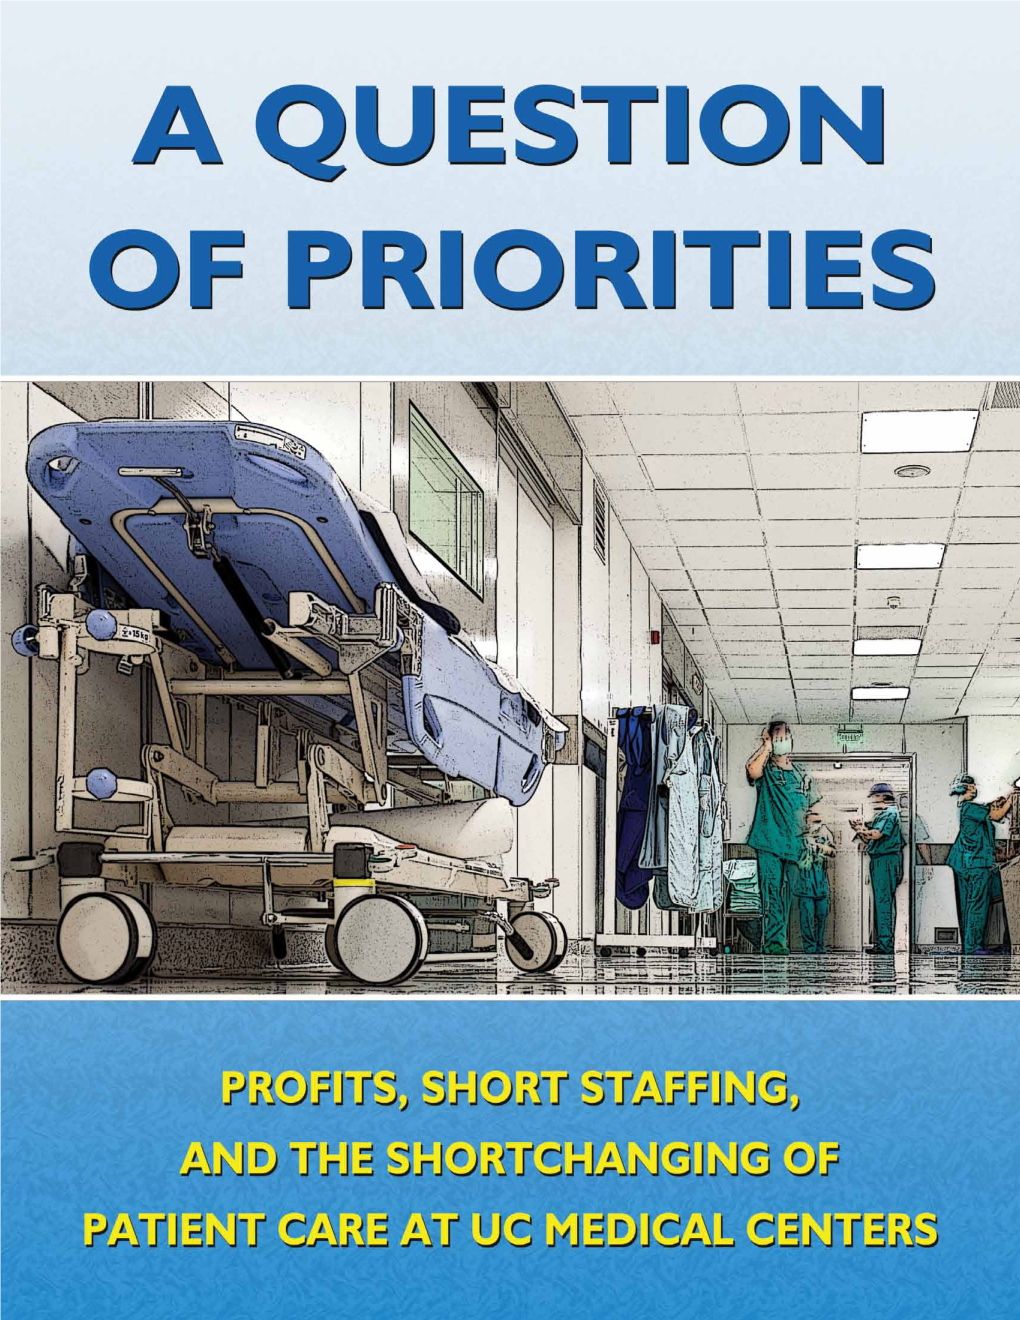 A QUESTION of PRIORITIES: Profits, Short Staffing, and the Shortchanging of Patient Care at UC Medical Centers